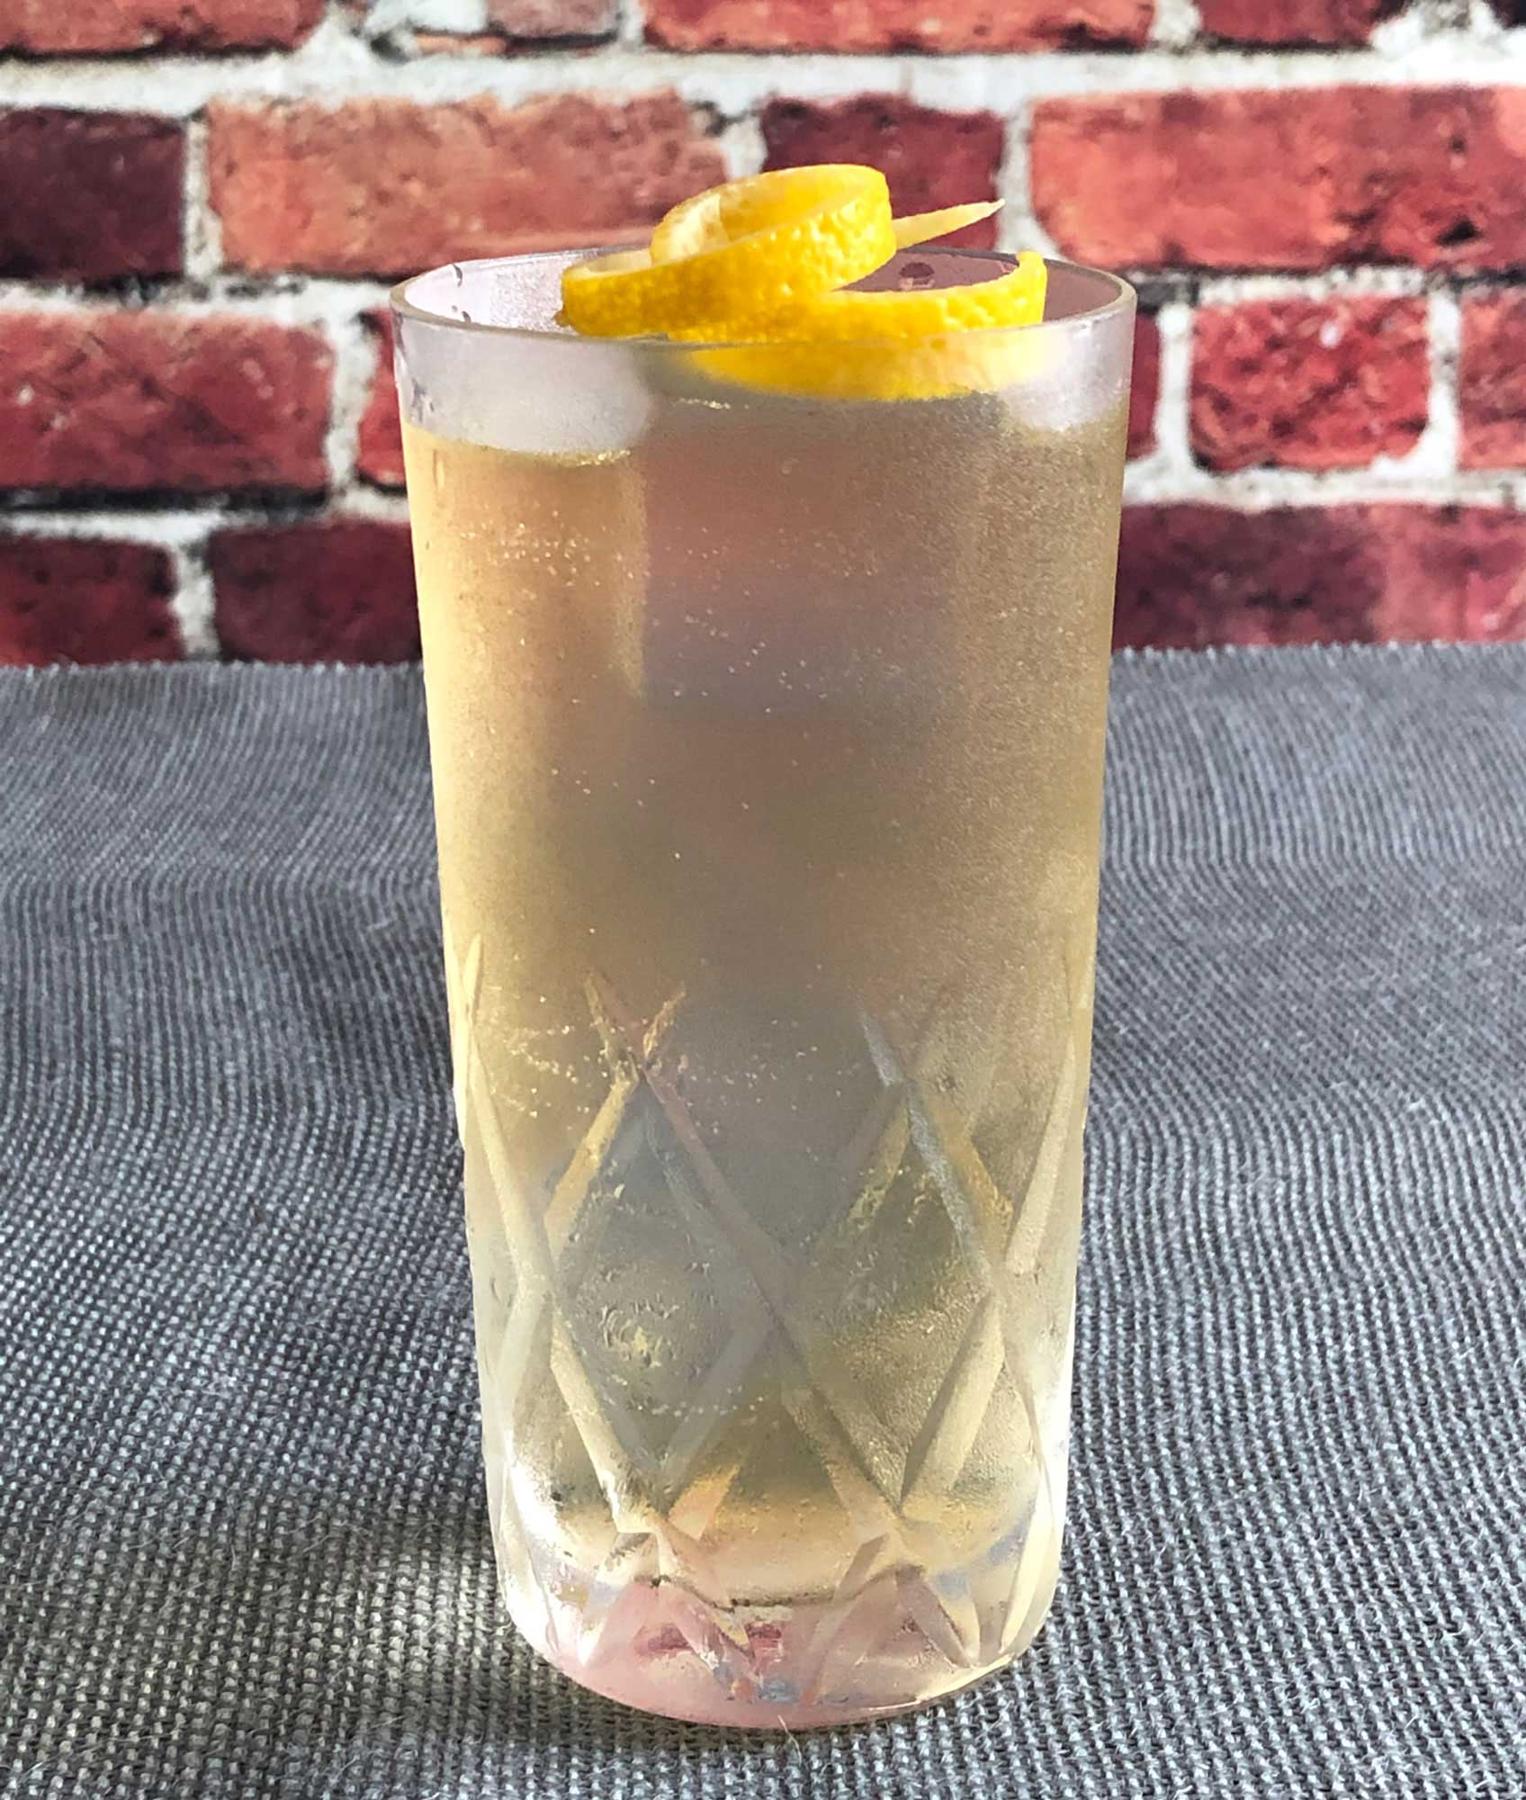 An example of the Auvergne Summer, the mixed drink (drink) featuring Rothman & Winter Orchard Peach Liqueur, Salers Gentian Apéritif, soda water, lemon wedge, and grapefruit twist; photo by Lee Edwards